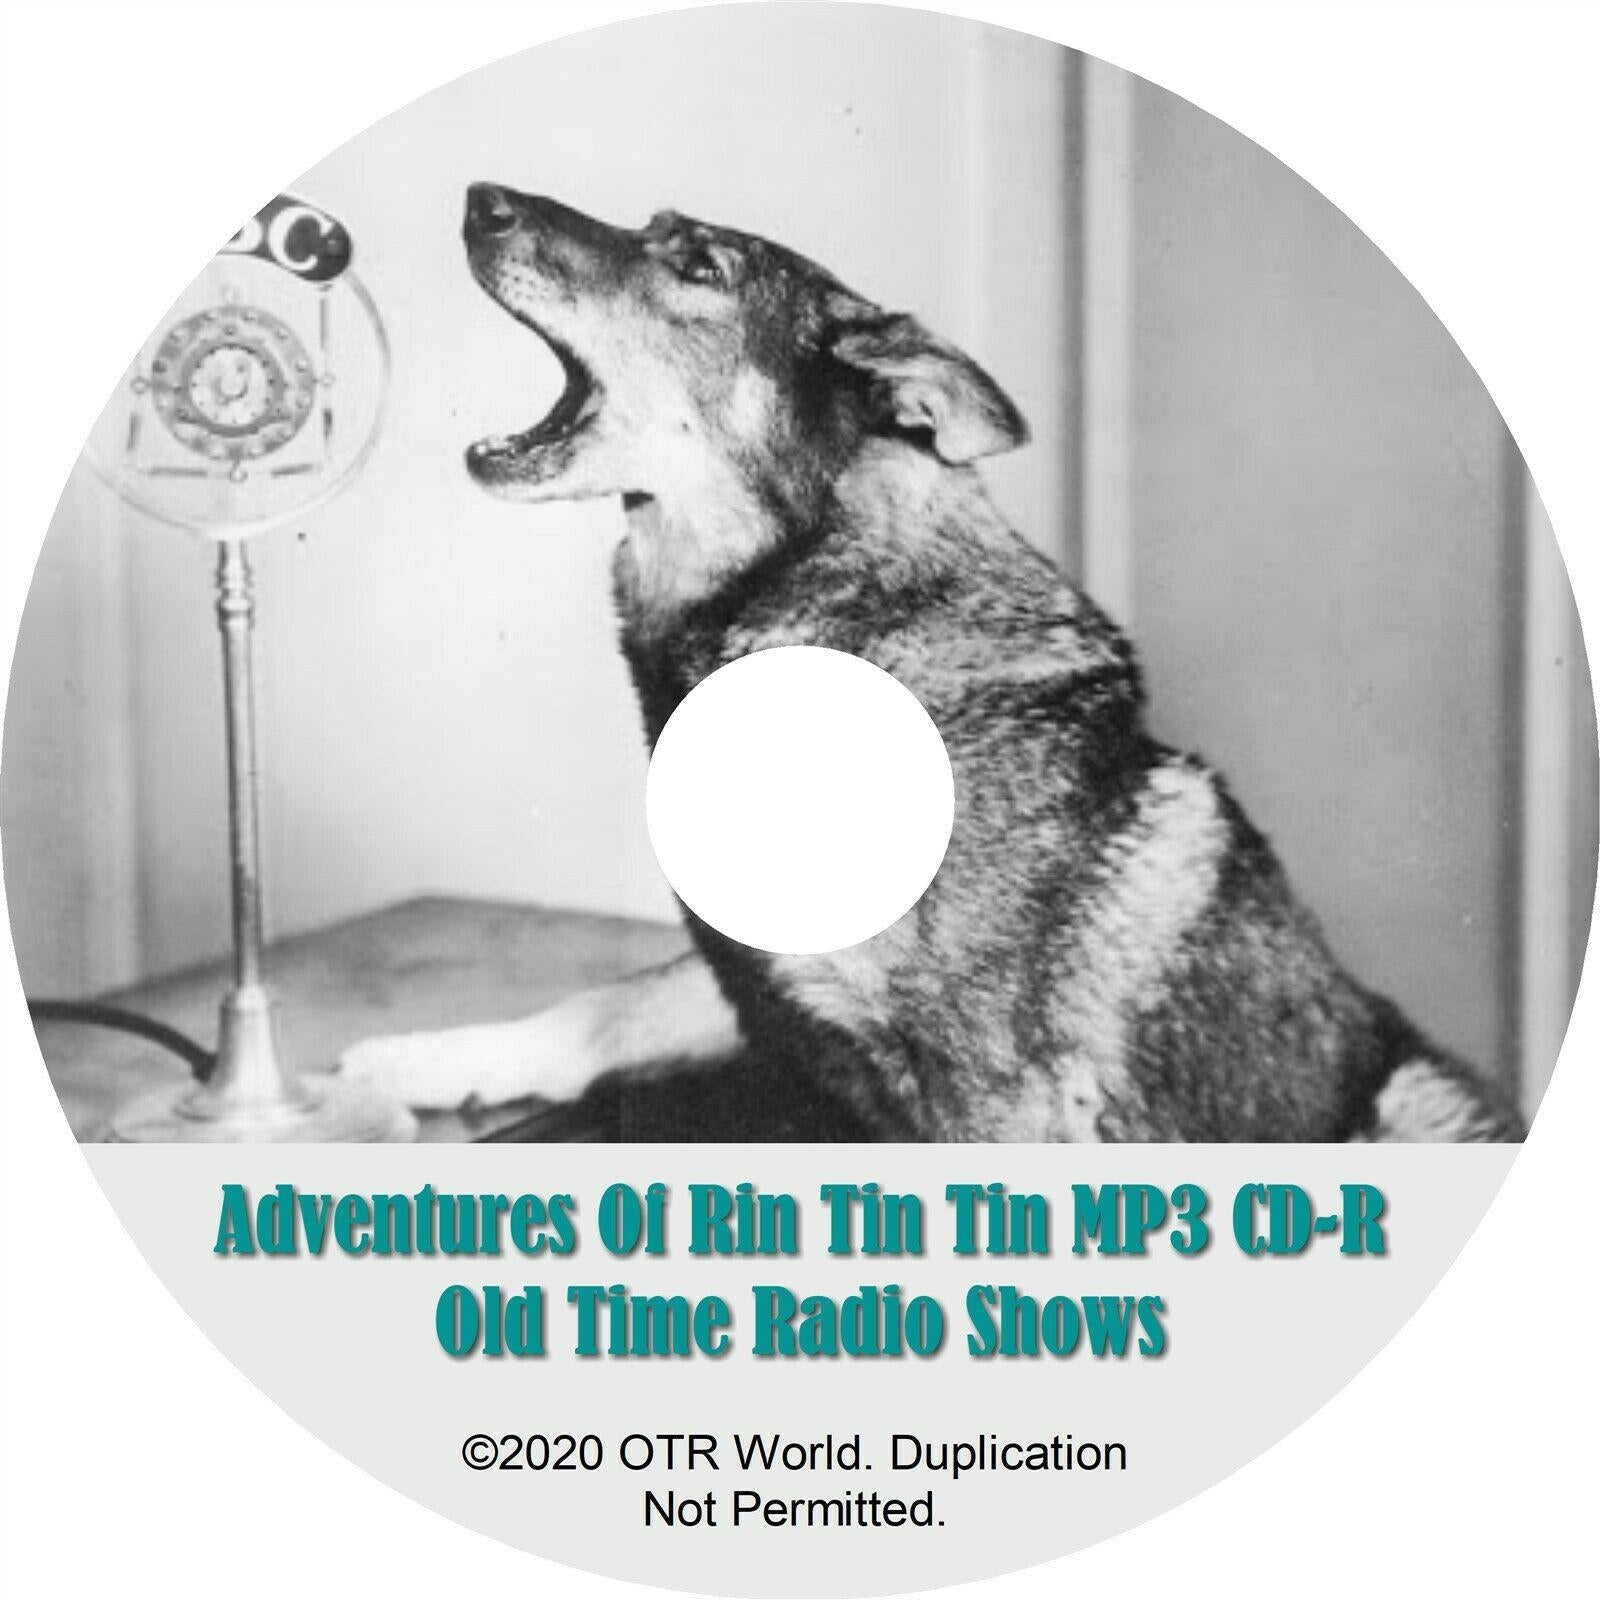 Adventures Of Rin Tin Tin OTR Old Time Radio Shows MP3 On CD-R 2 Episodes